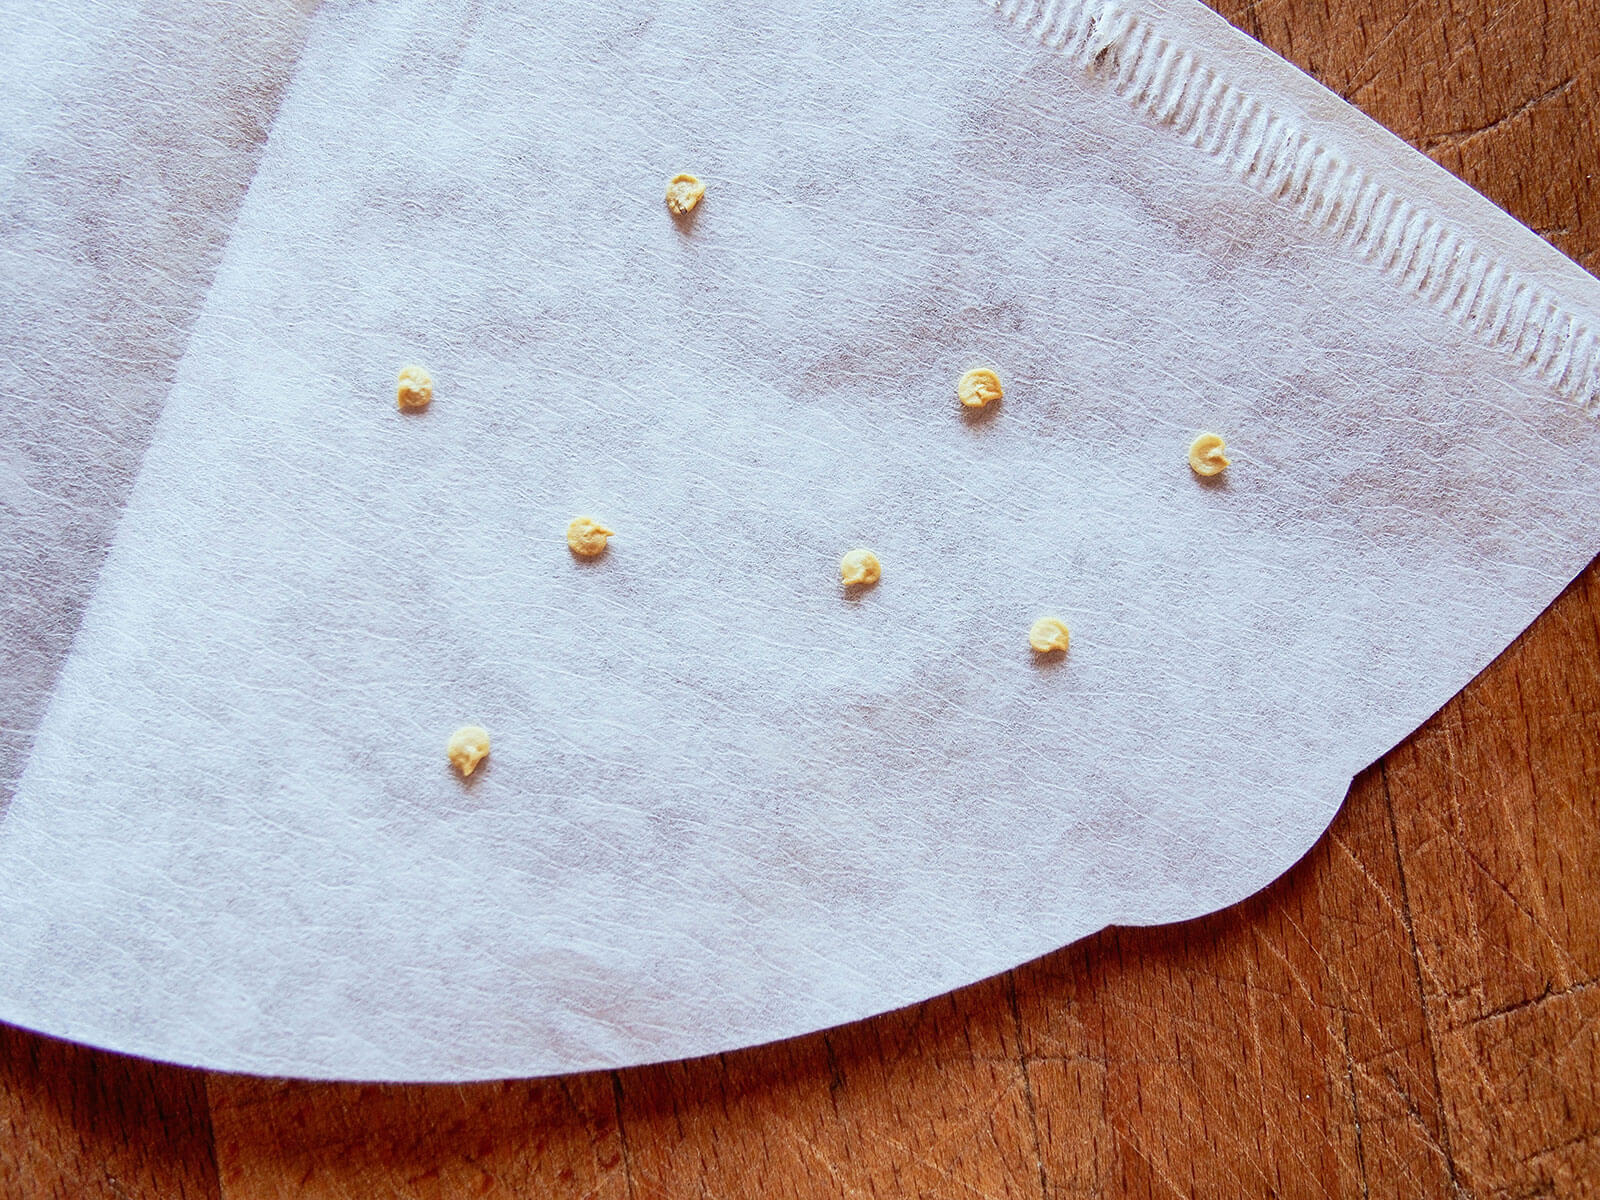 Germinating seeds in a coffee filter (works with a paper towel too)